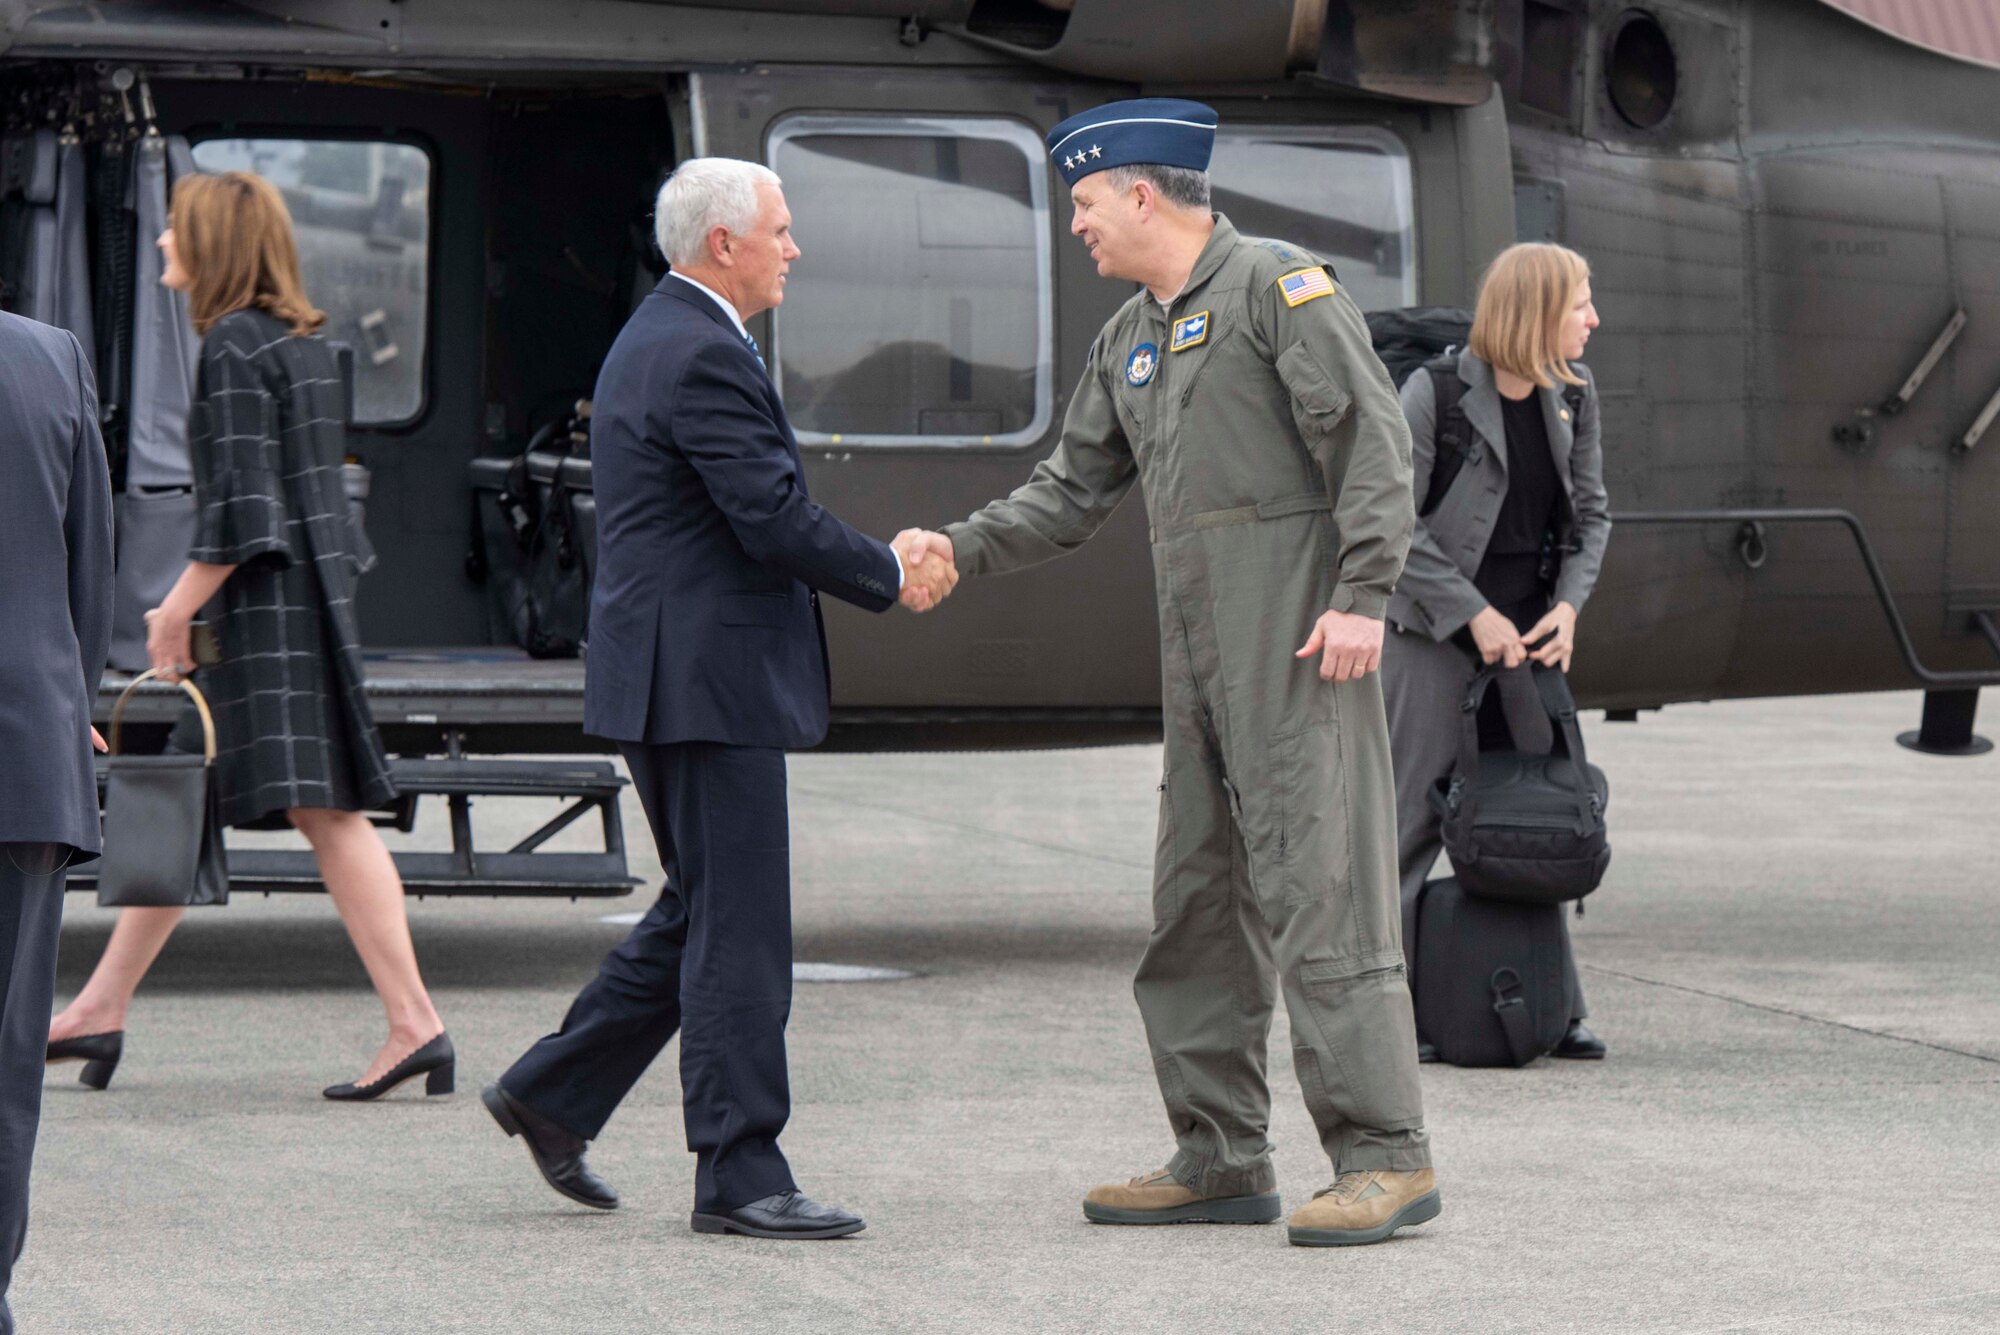 Vice President of the United States Michael R. Pence shakes hands with Lt. Gen. Jerry P. Martinez, U.S. Forces Japan and 5th Air Force commander, after arriving at Yokota Air Base, Japan, Nov. 13, 2018.